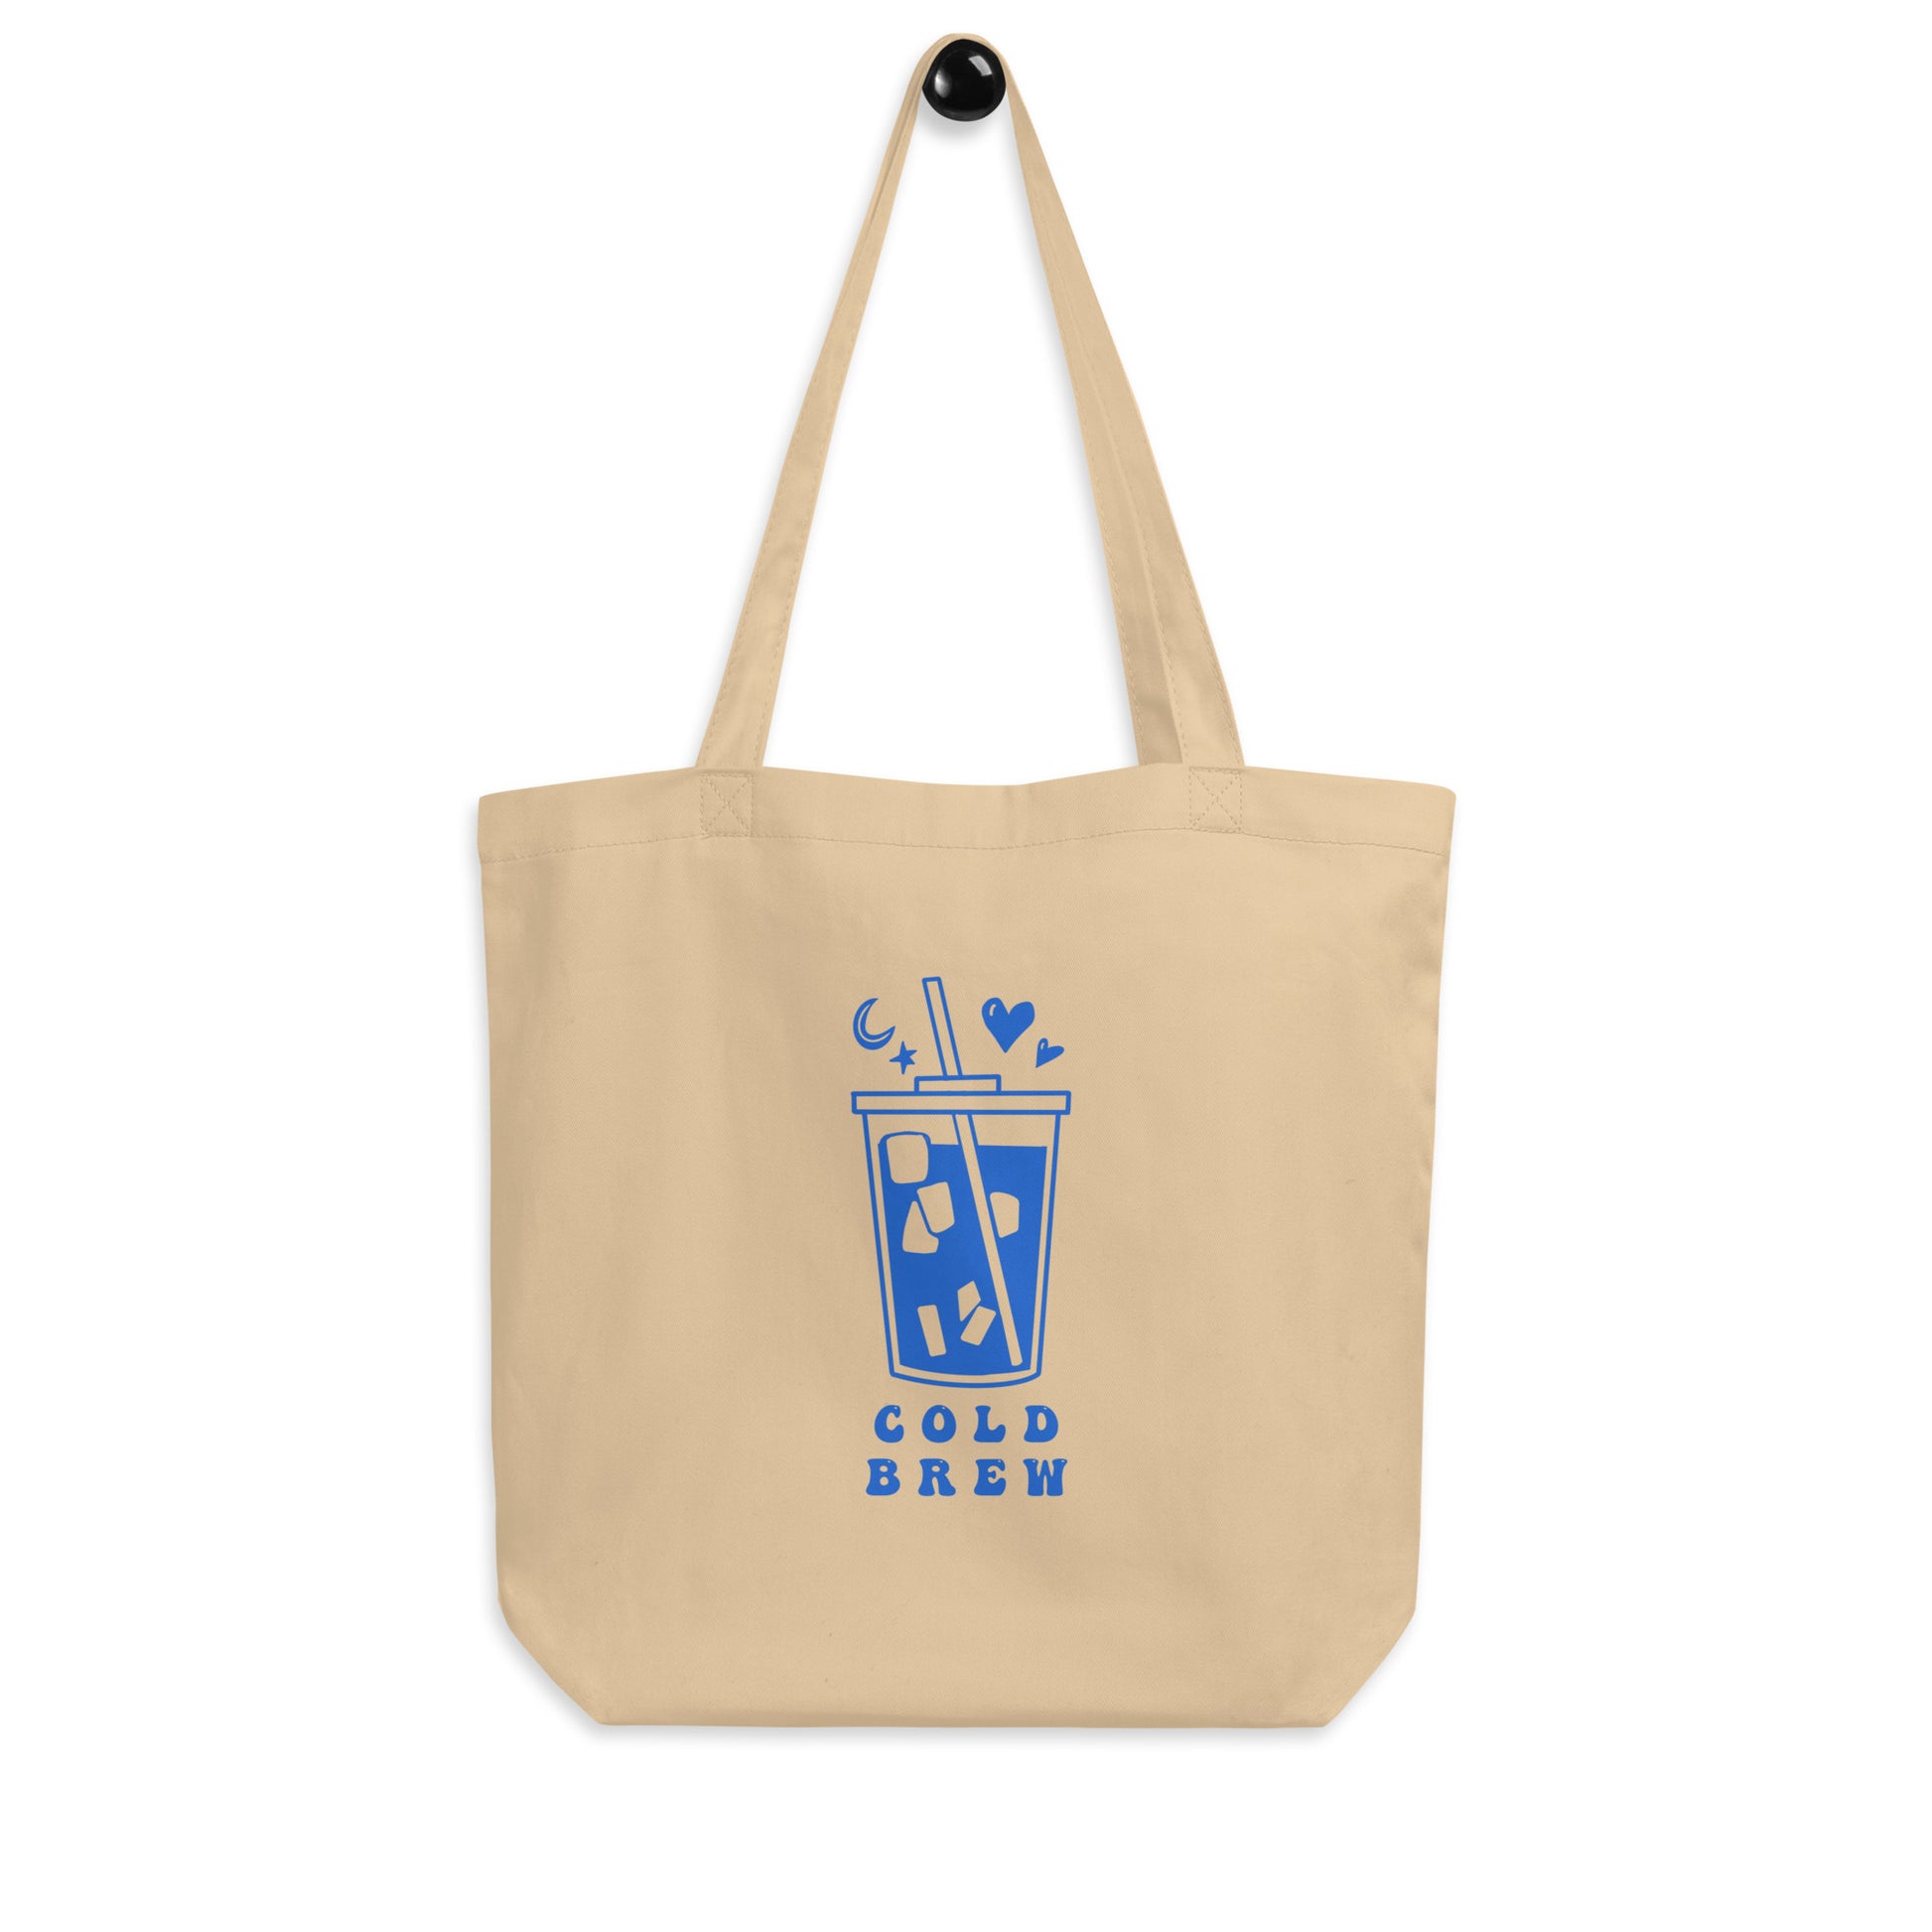 Ford Logo Tote Bag- Official Ford Merchandise